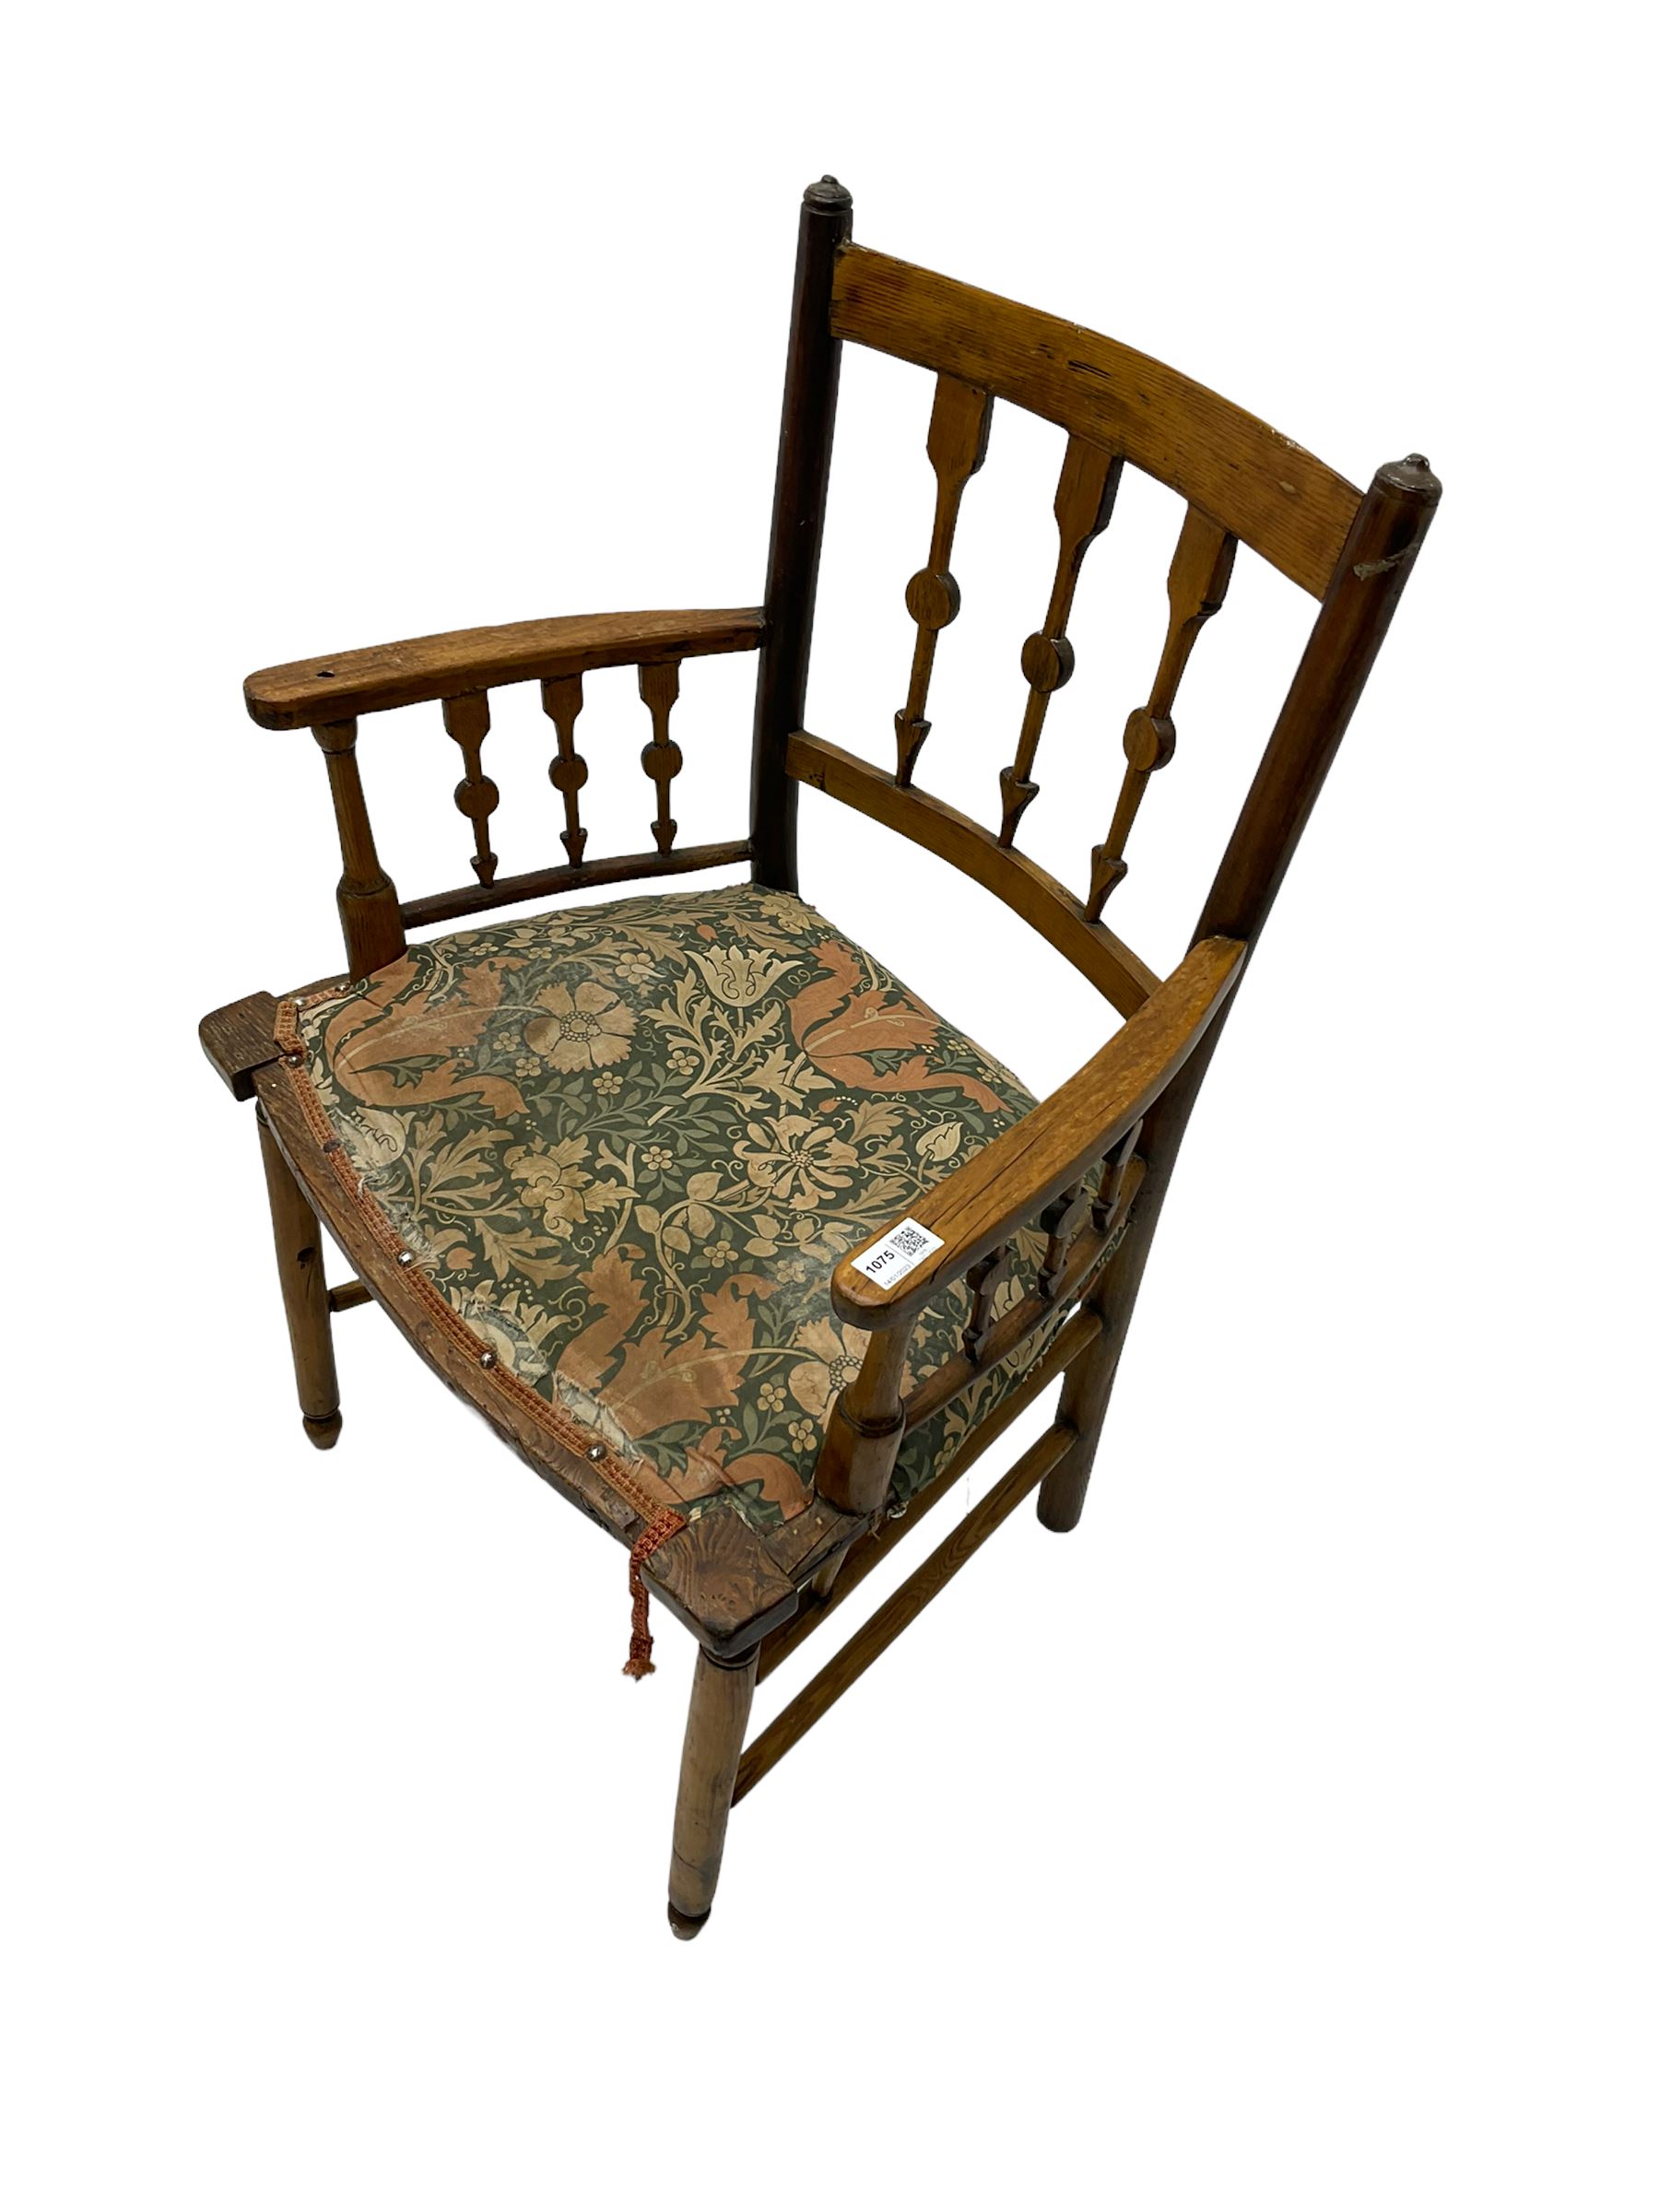 19th century ash and beech Sussex type elbow chair - Image 4 of 6